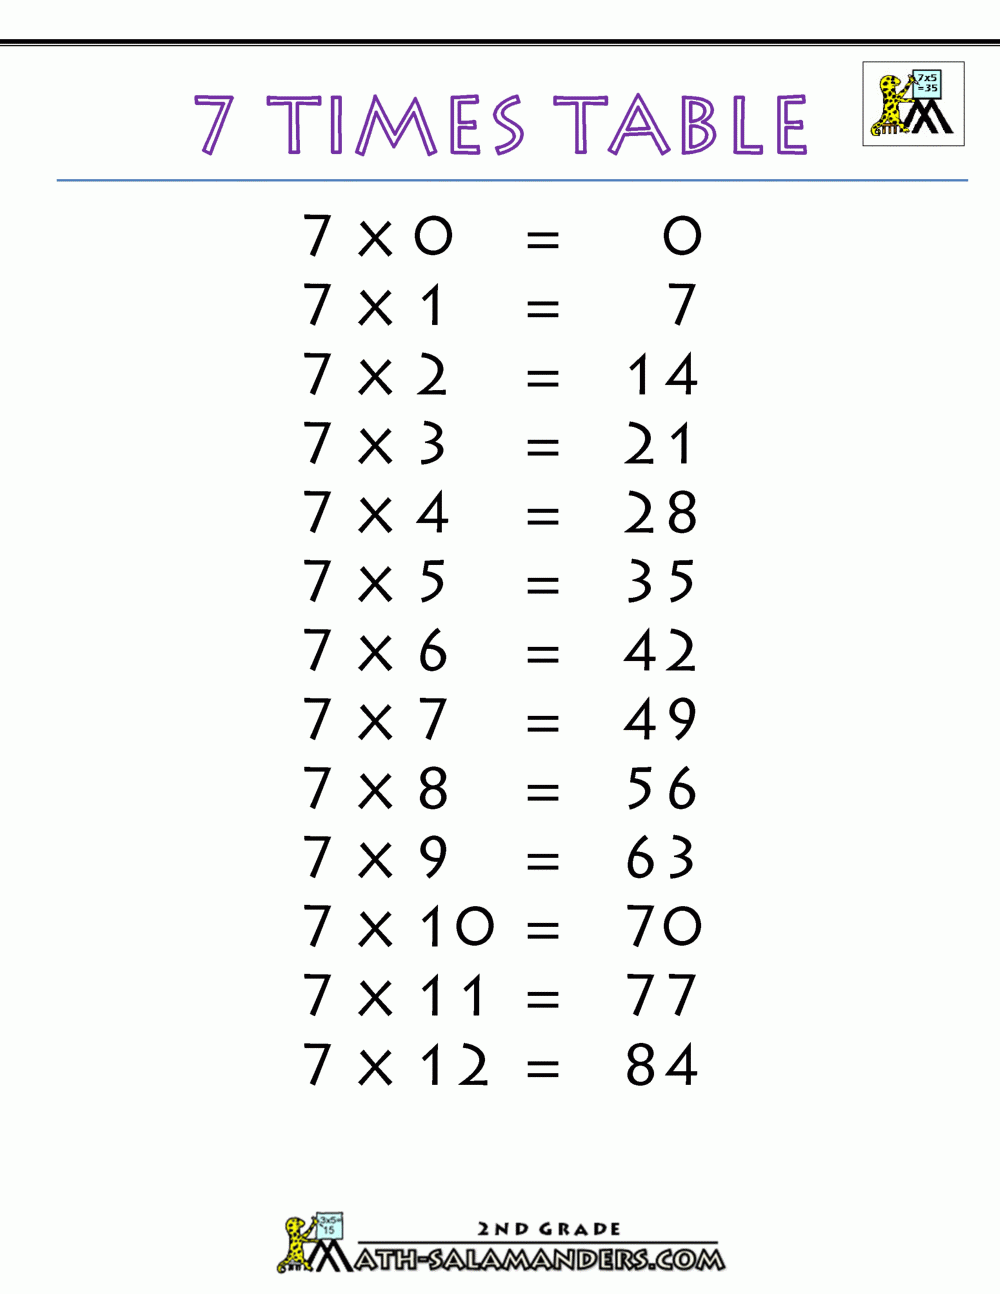 Multiplication Facts 7 Times Table